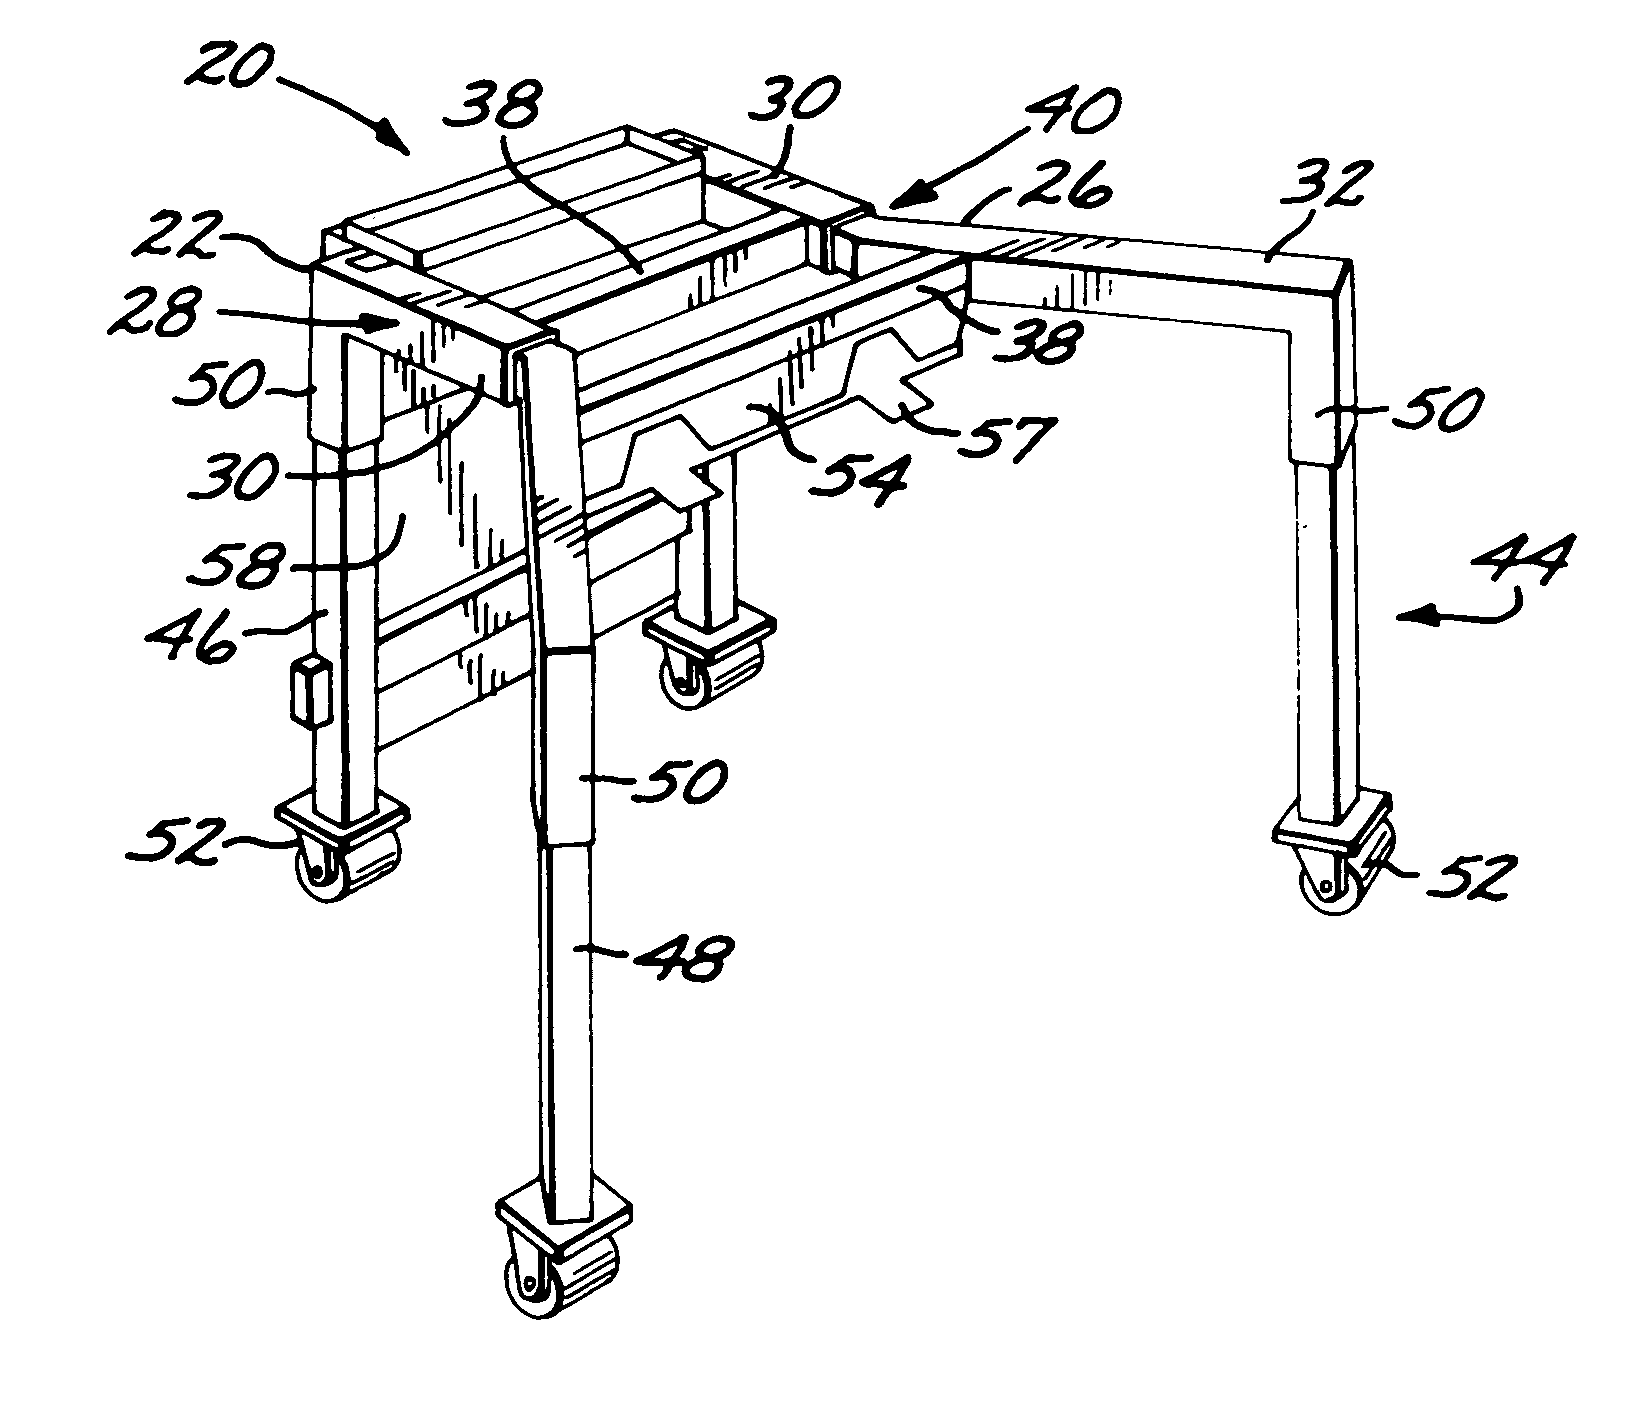 Support structure with Y-shaped support stand